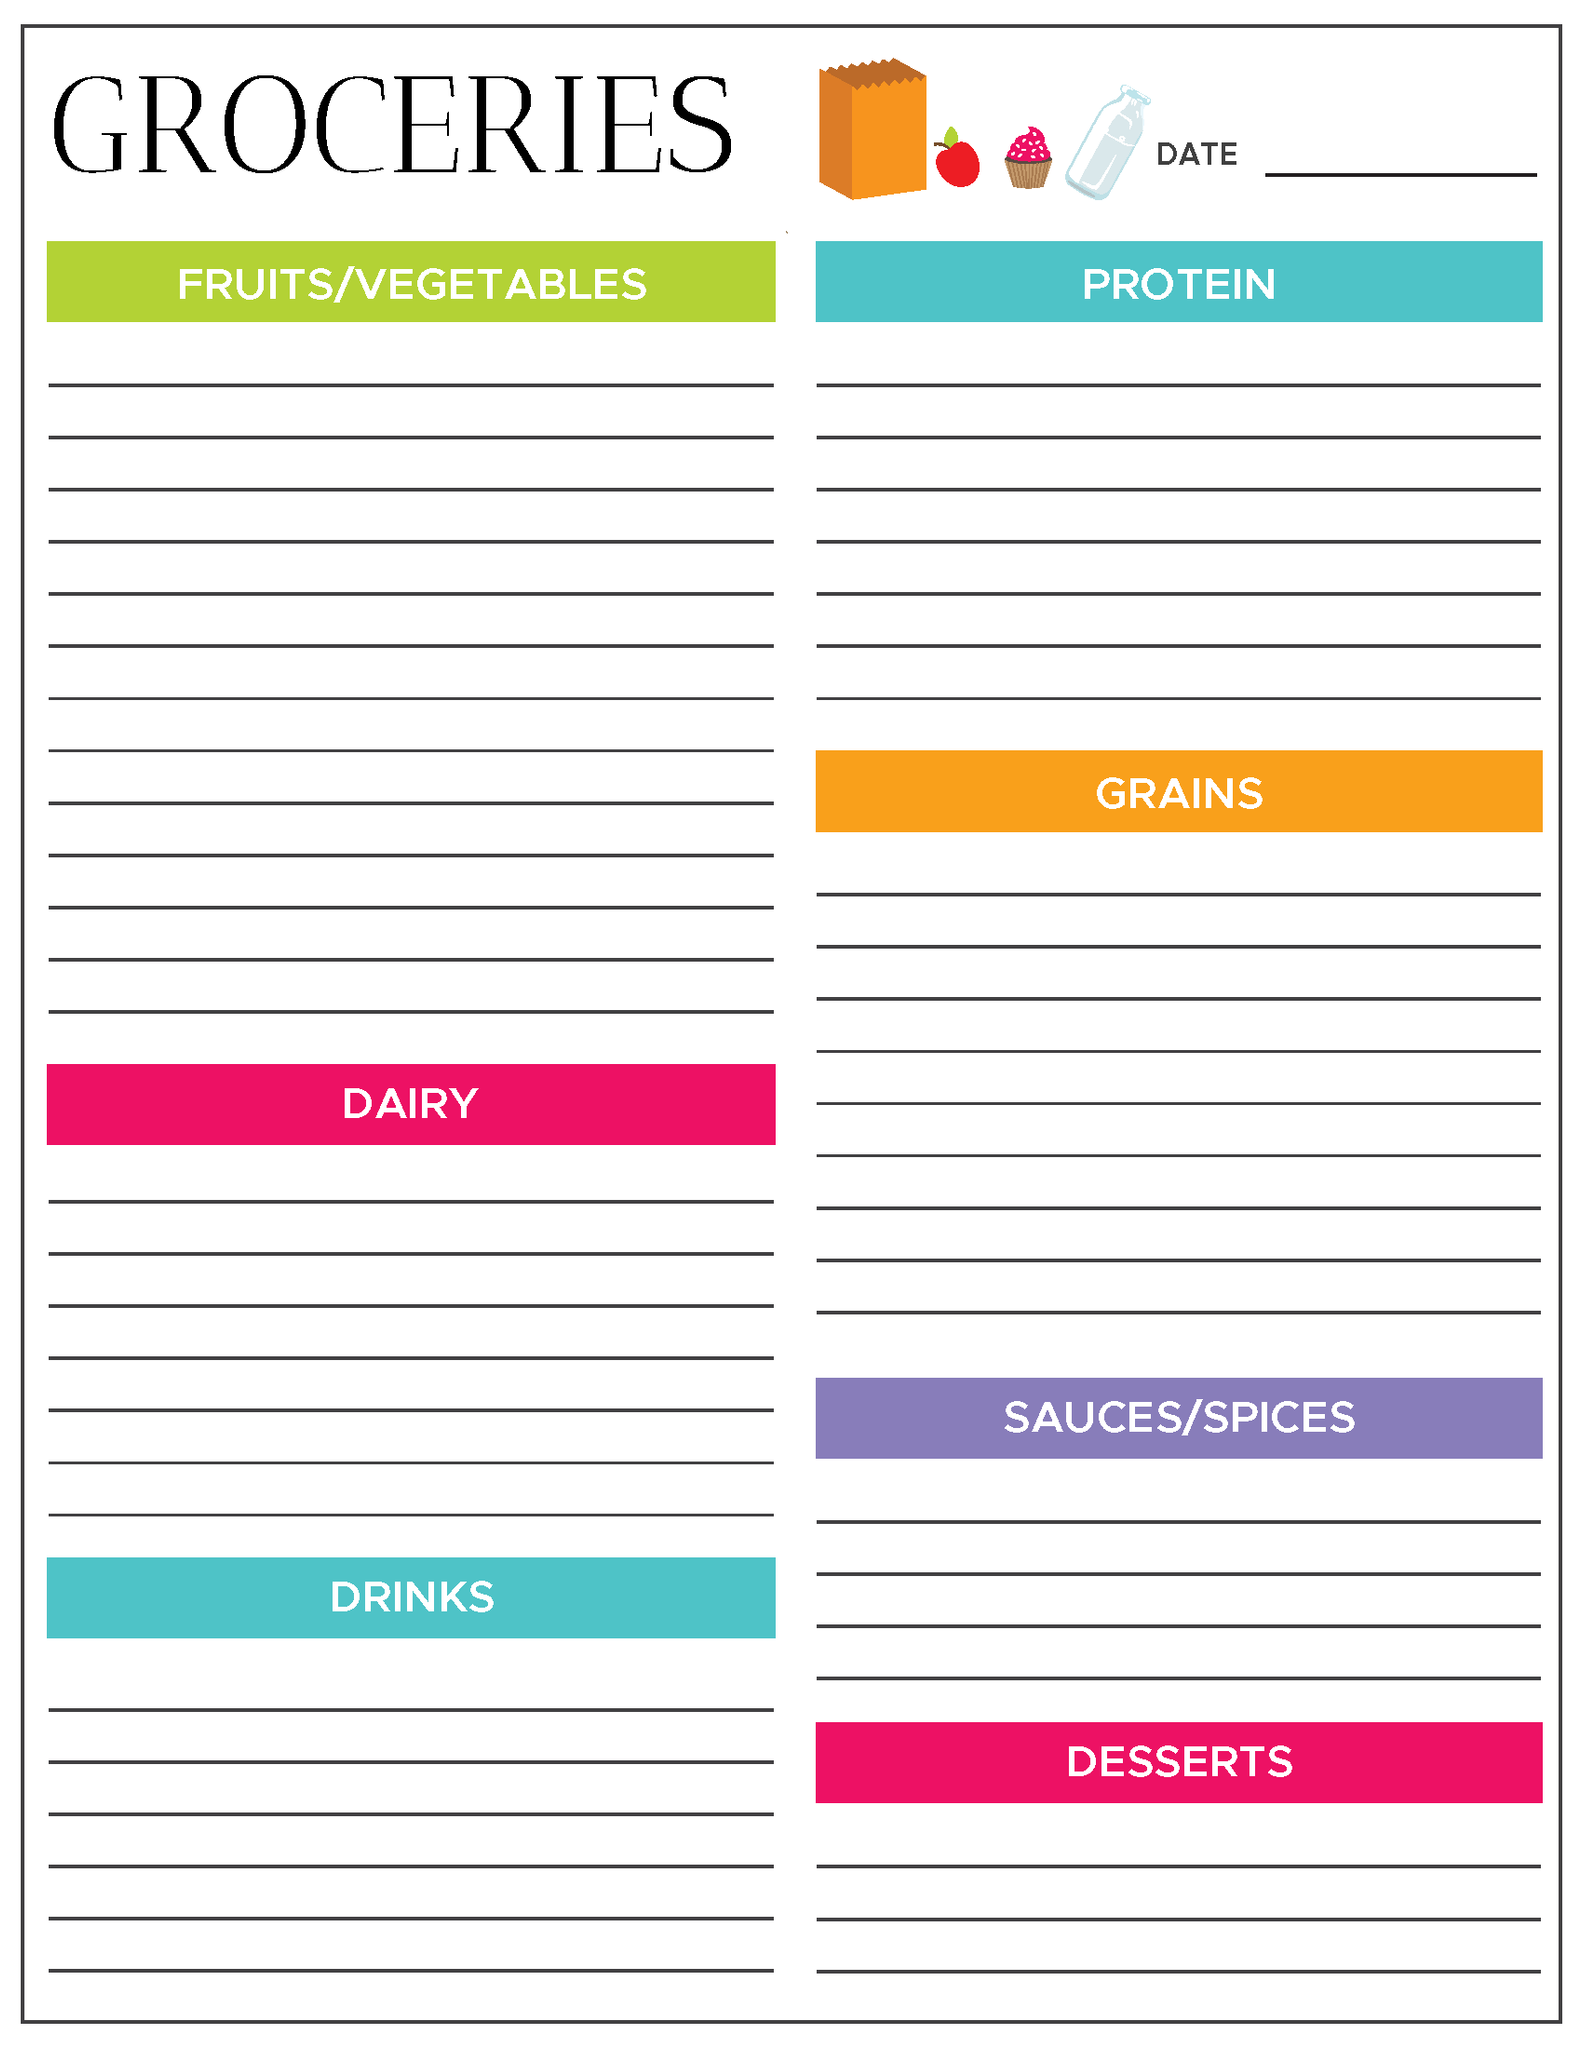 Free printable 21 Day Fix meal planning sheets